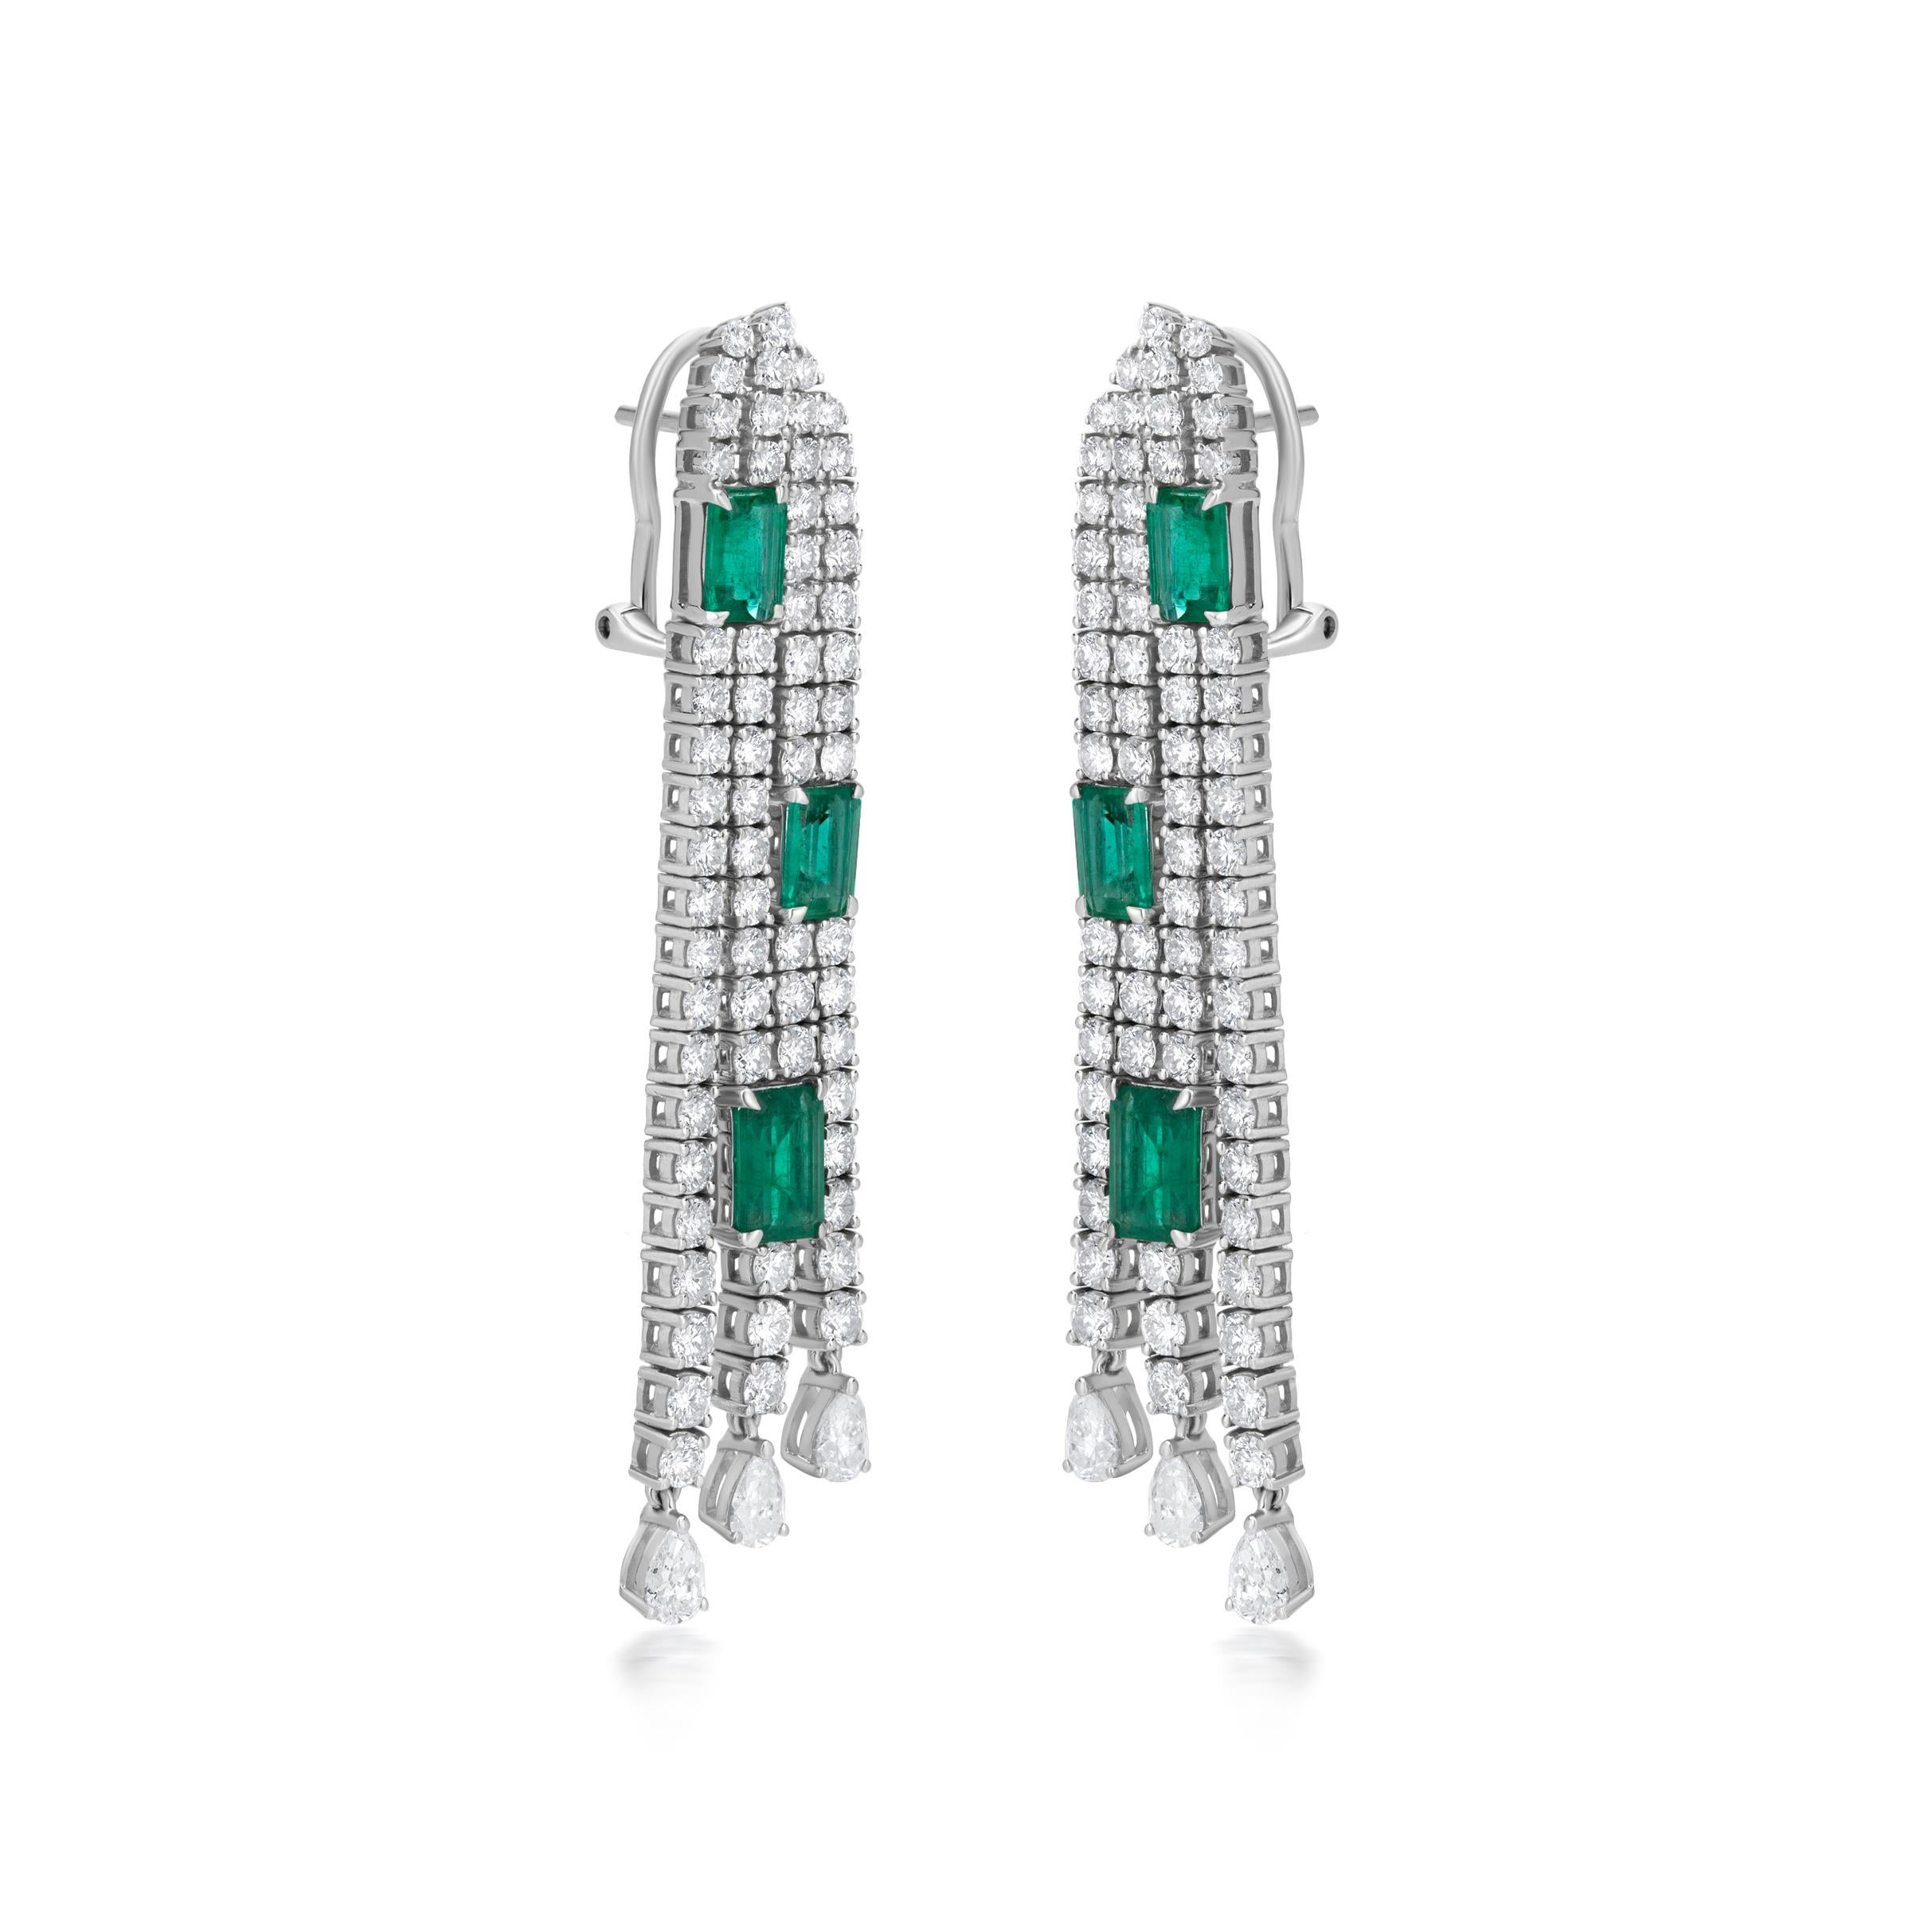 The flowing motif of the dangle earring is accentuated with octagonal emeralds and pear & round-cut diamonds. It looks like a waterfall. The diamond rows of the dangler are clubbed together by octagons of emerald. These octagons of emerald hold the